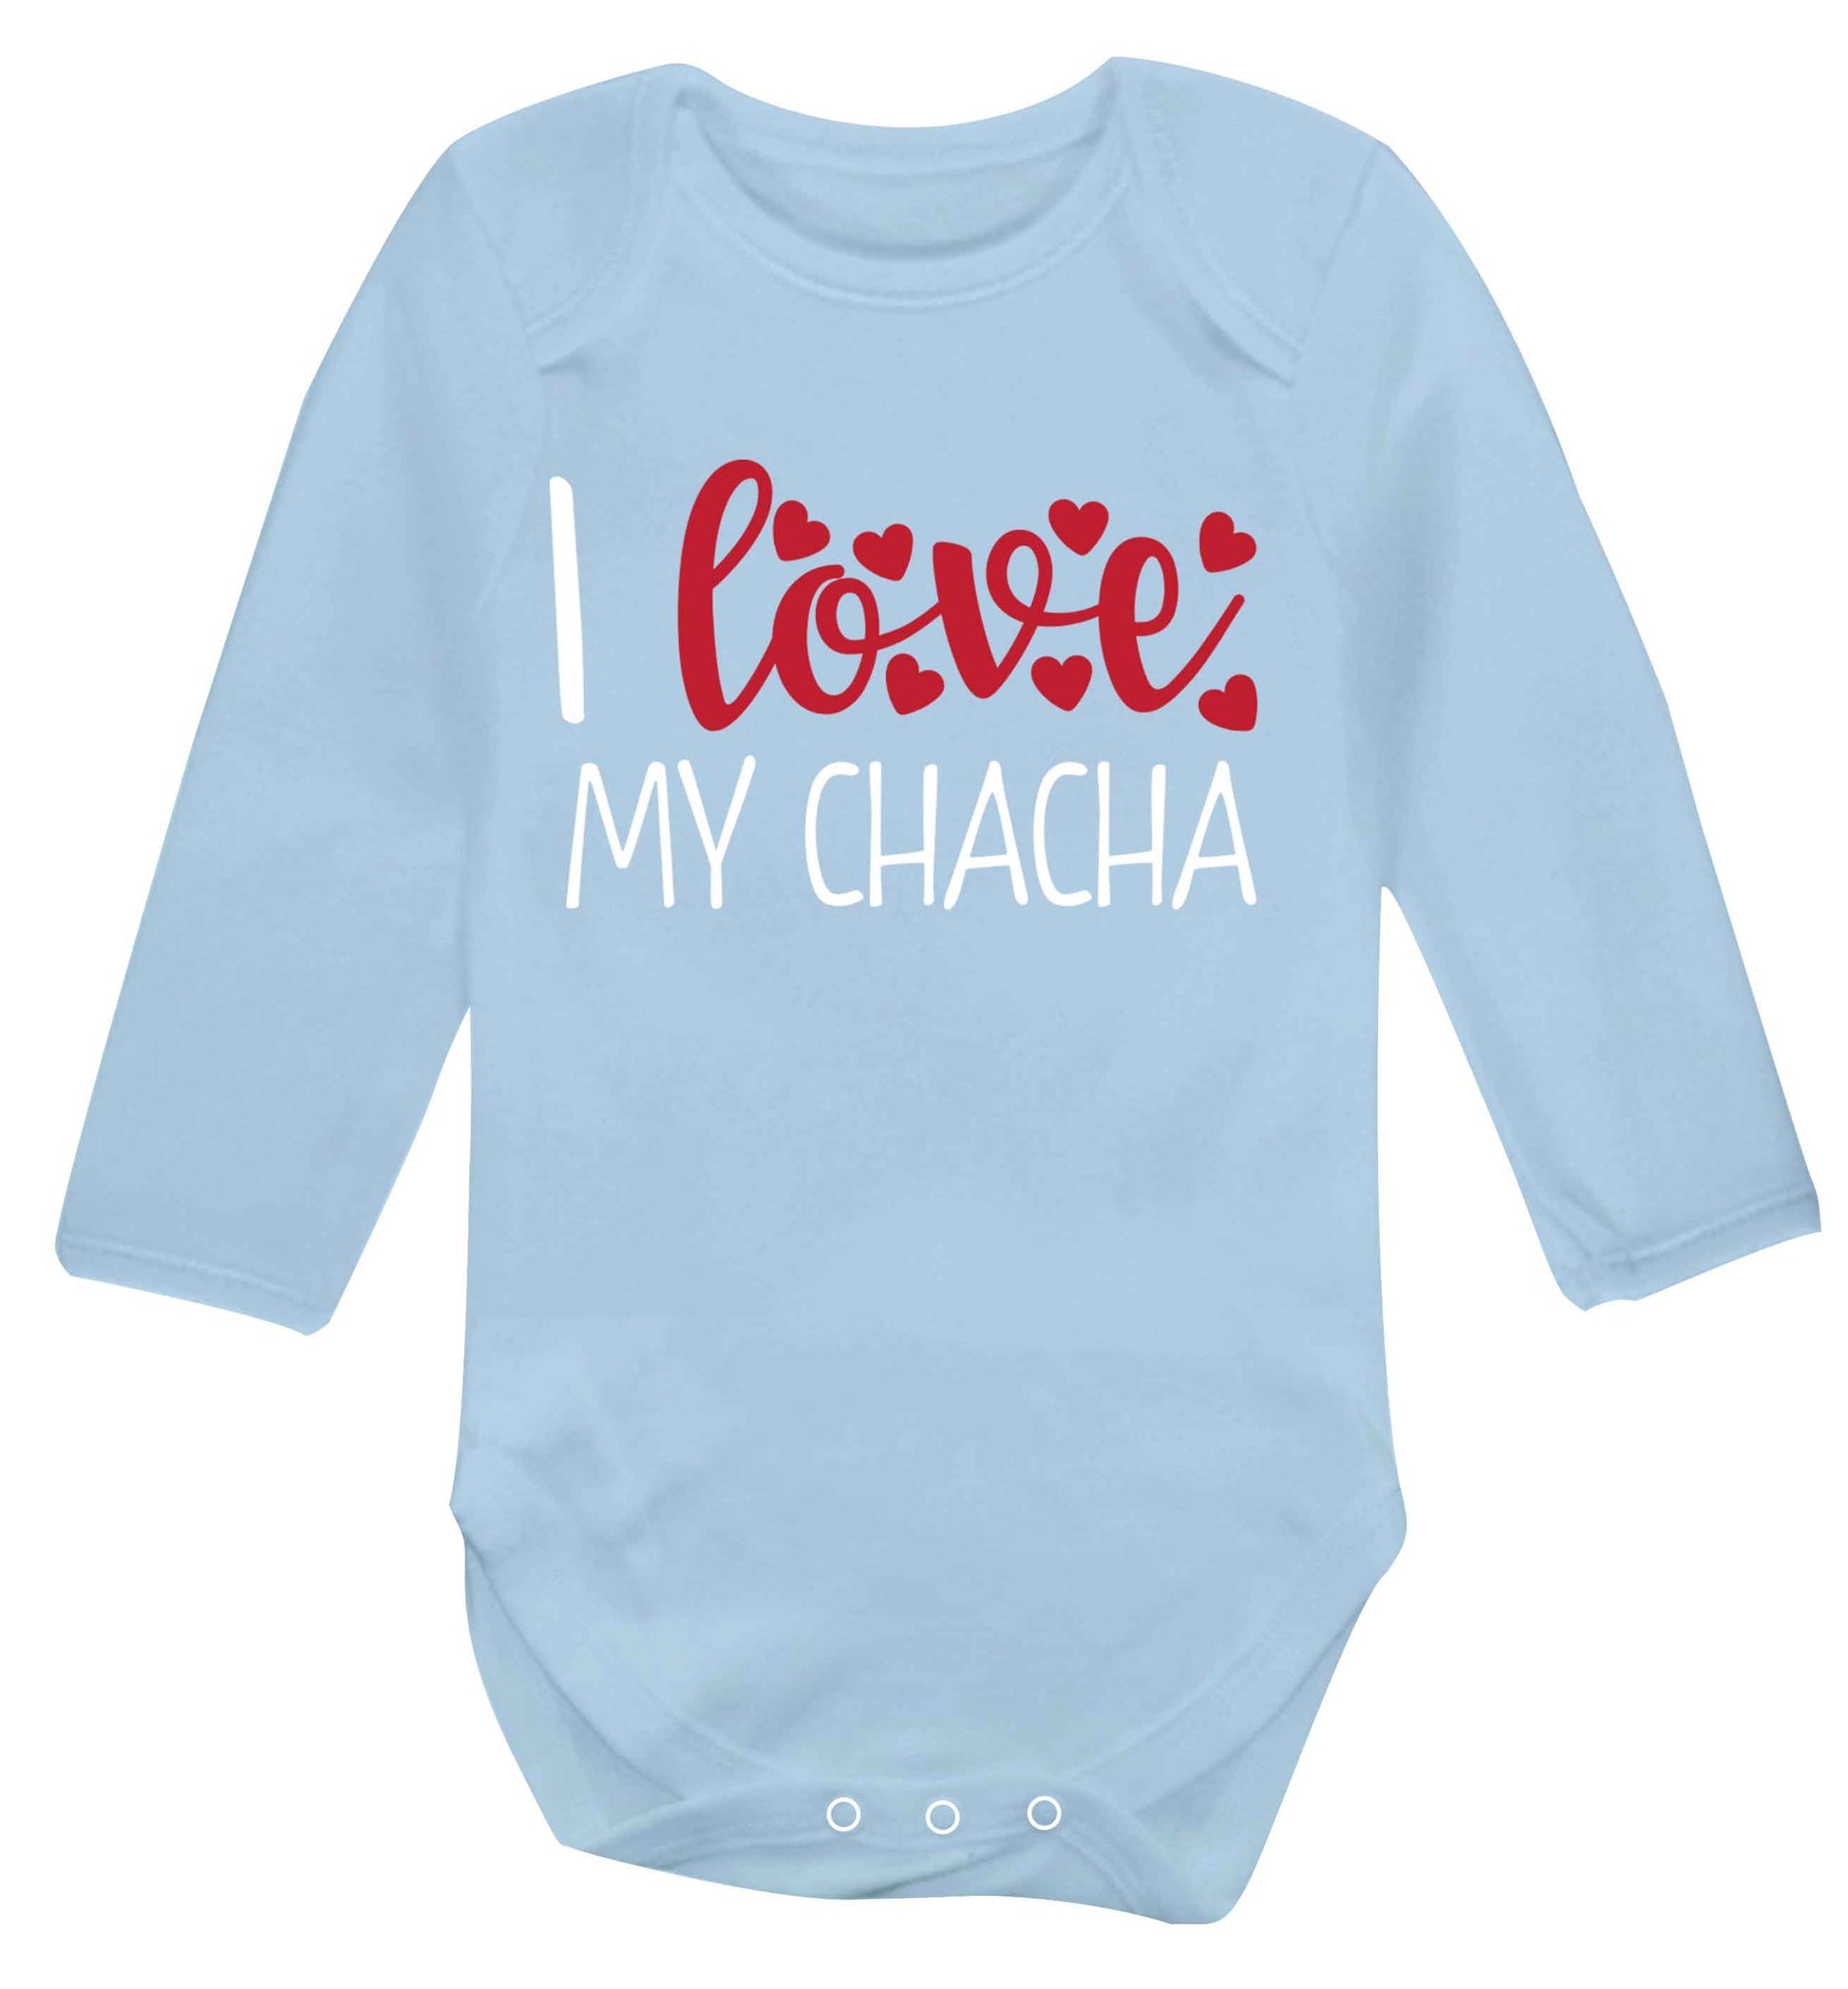 I love my chacha Baby Vest long sleeved pale blue 6-12 months